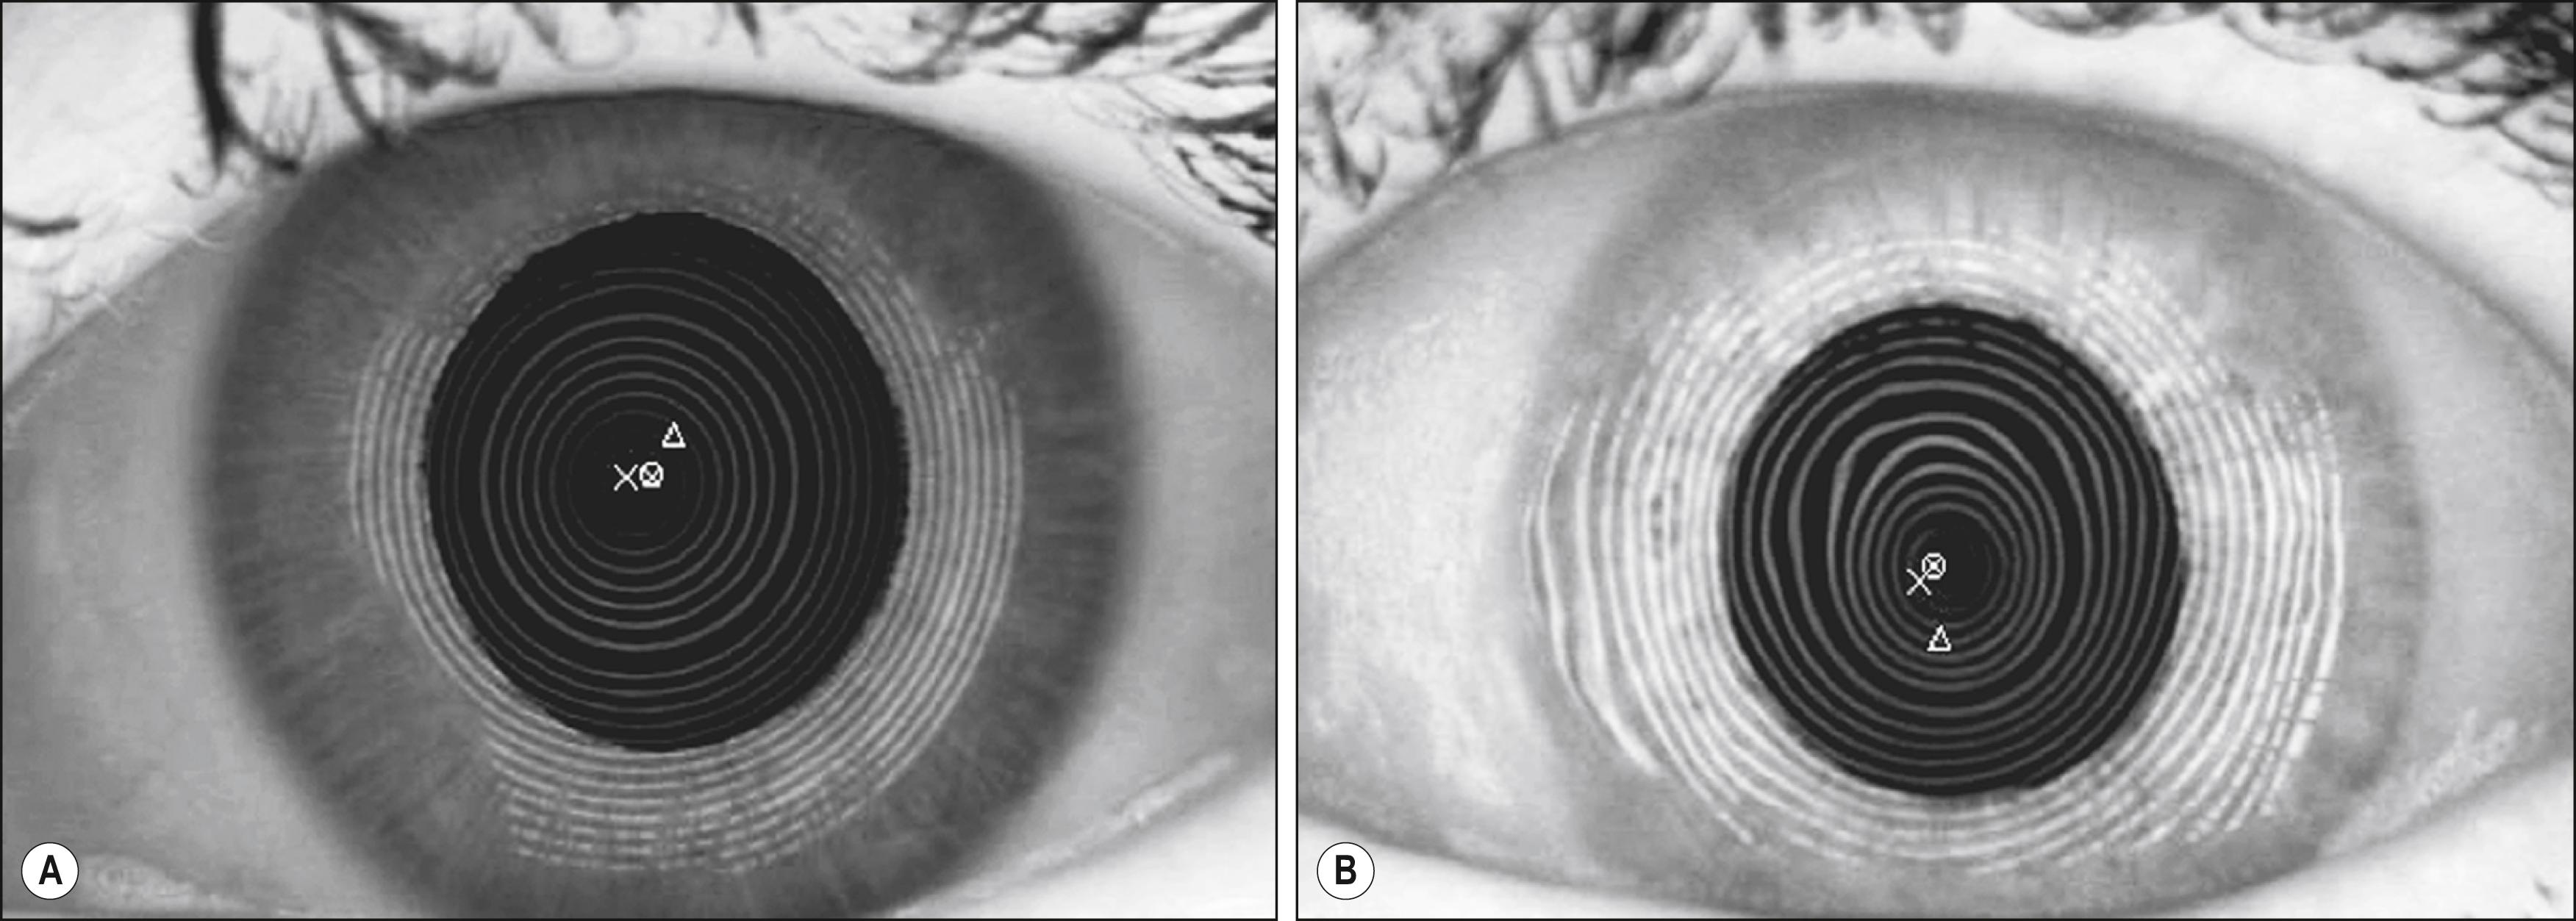 Fig. 11.2, Placido disk-based topography with normal ( A ) and irregular ( B ) Placido rings. Evenly spaced rings are seen in the normal cornea with minimal astigmatism. The irregular rings show central flattening and inferior steepening with rings spaced further apart and closer together, respectively.